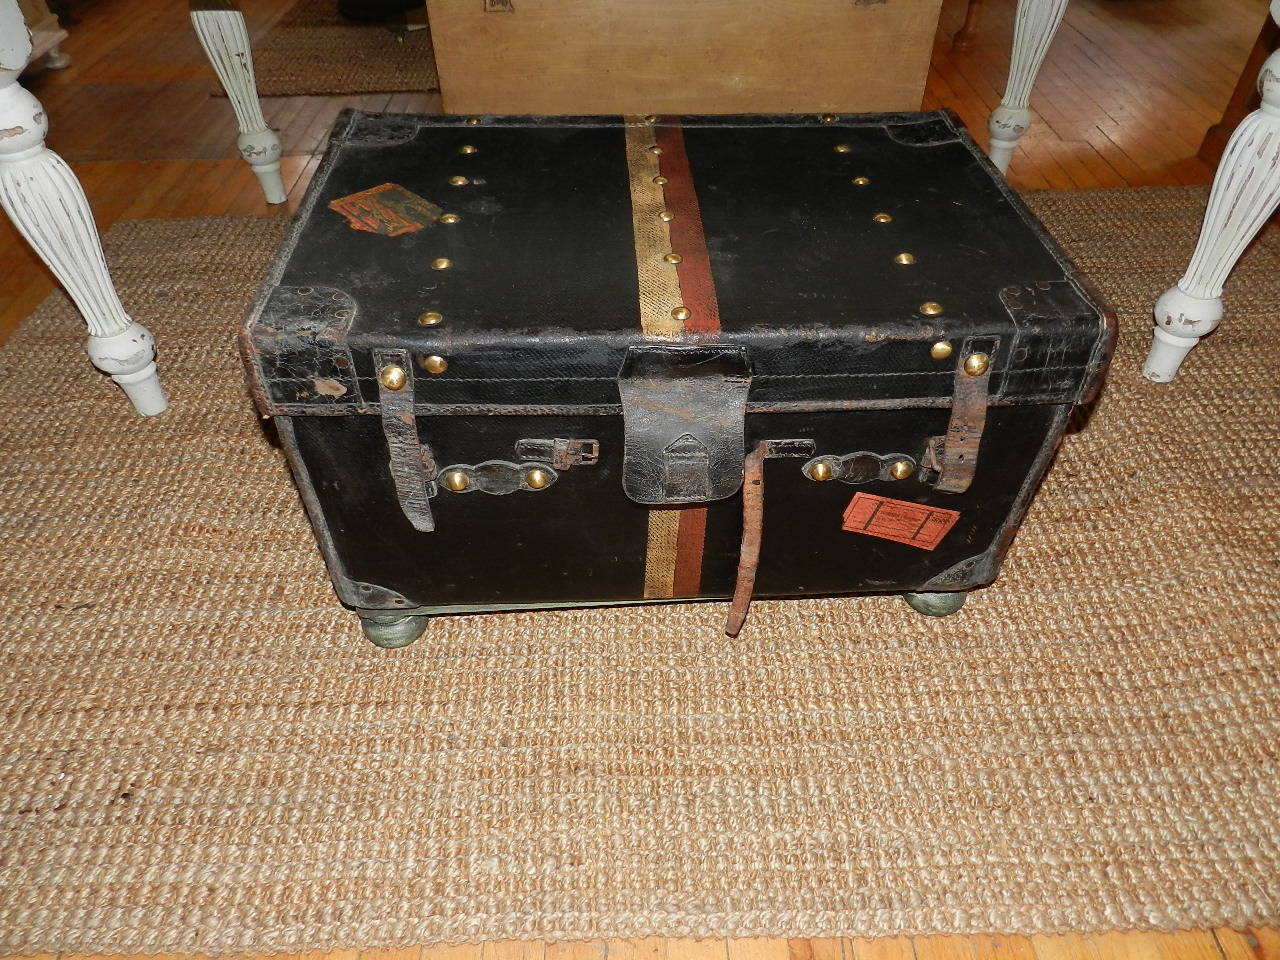 Original steamer trunk from early 1900s with leather strapping and brass lock with wooden stand.